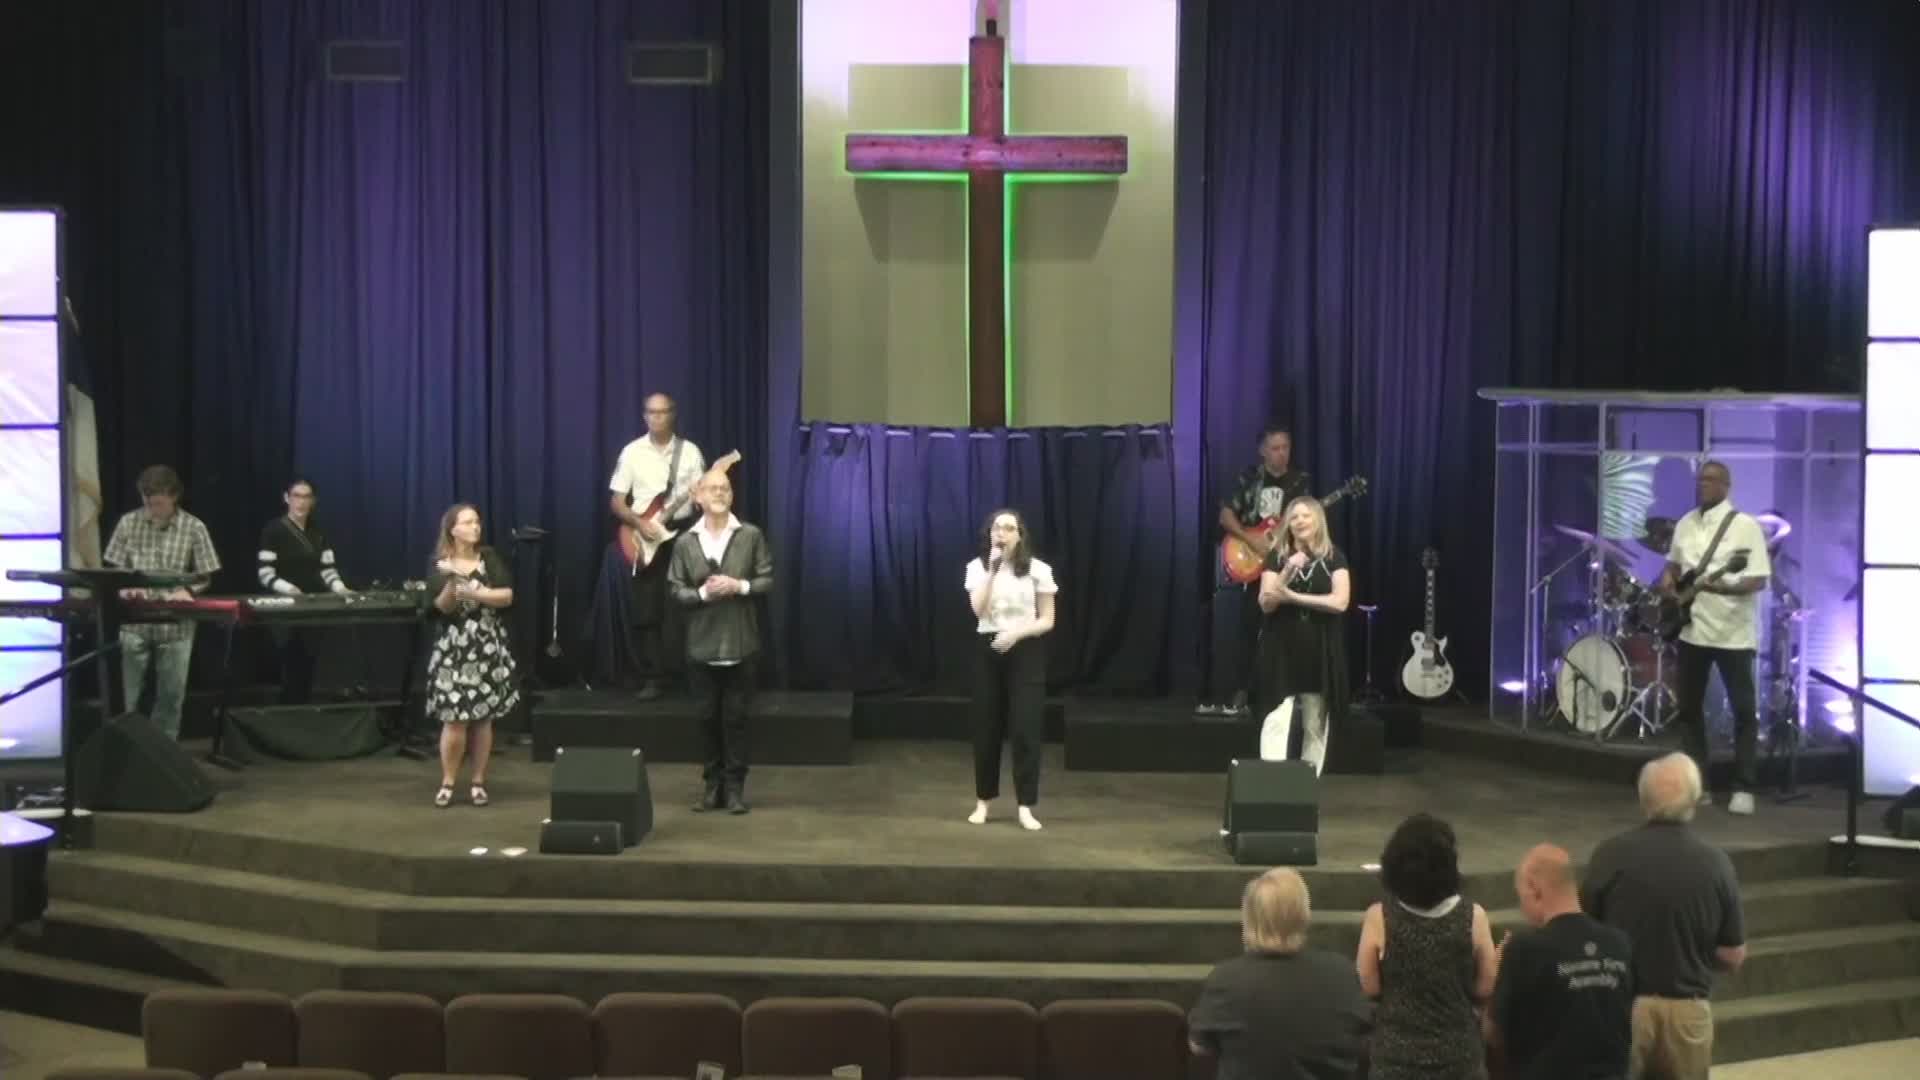 Sunday Morning - First Service